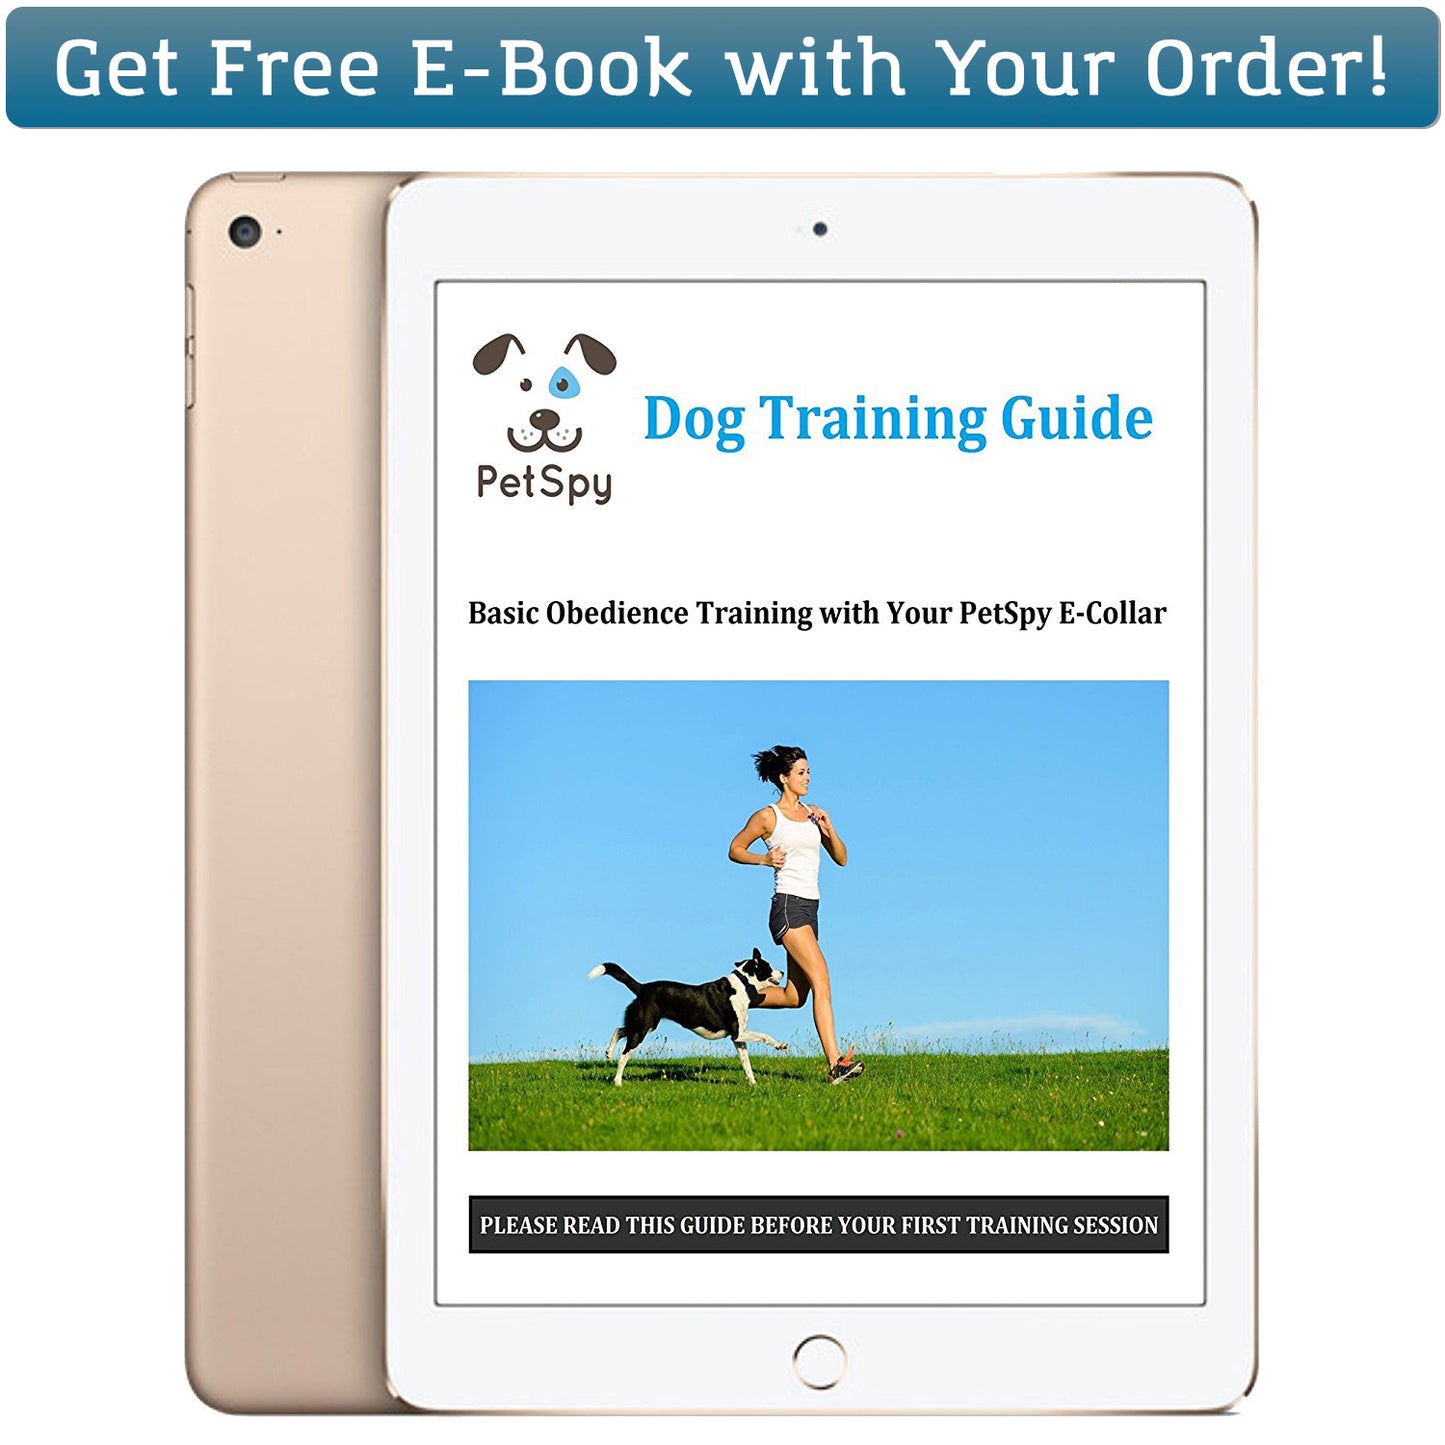 Free Dog training guide with your order 